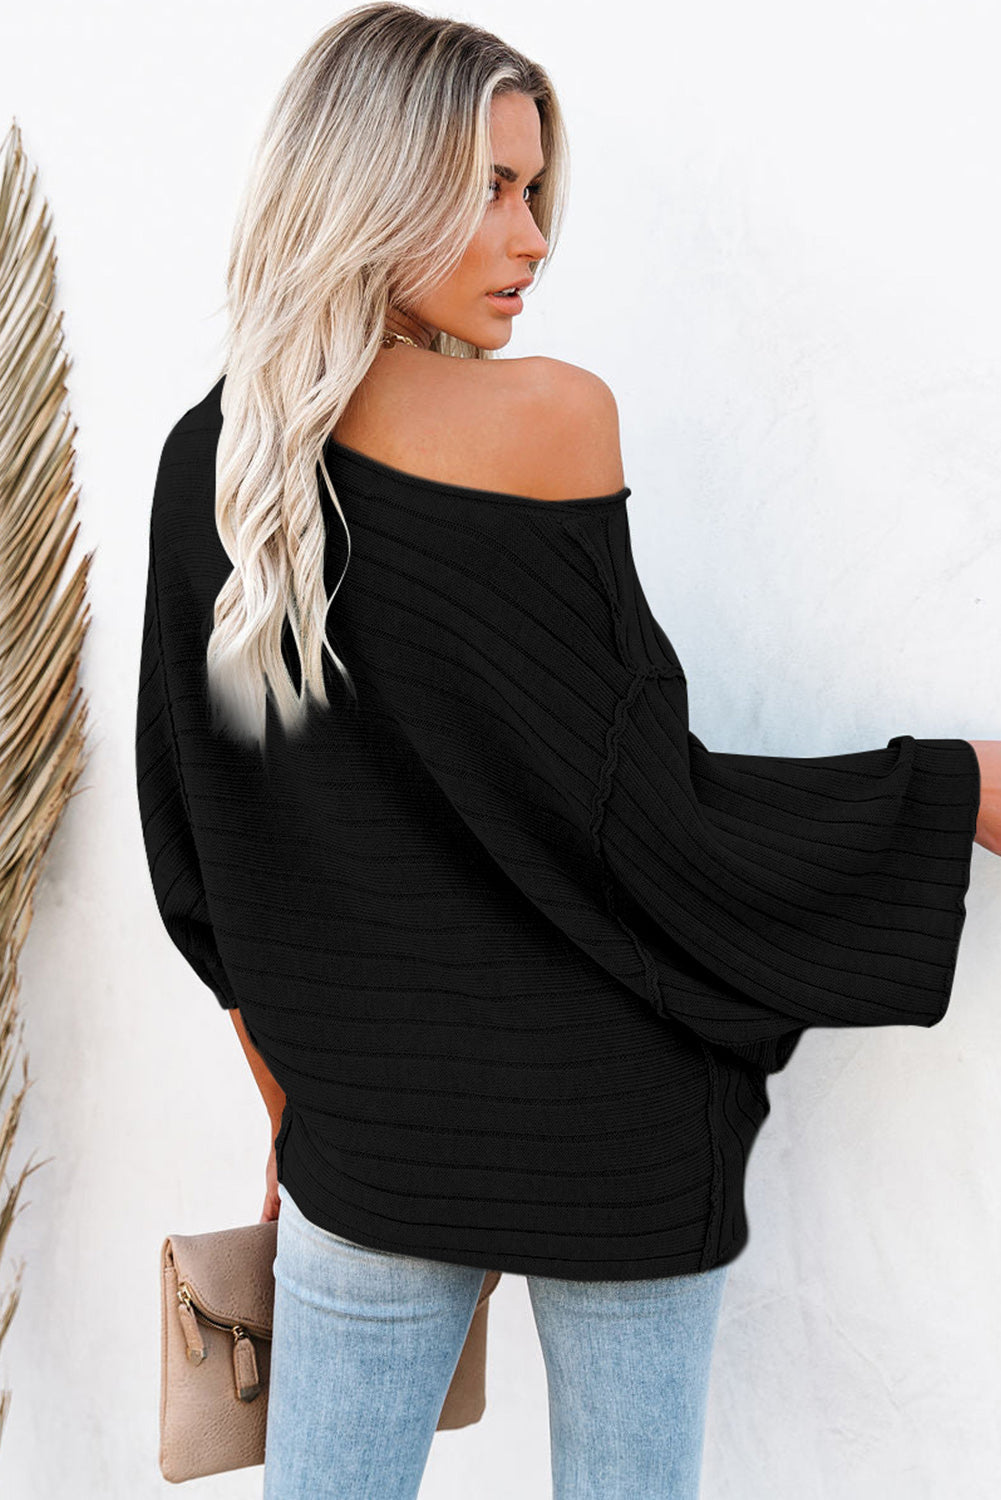 Black Exposed Seam Ribbed Knit Dolman Top-1